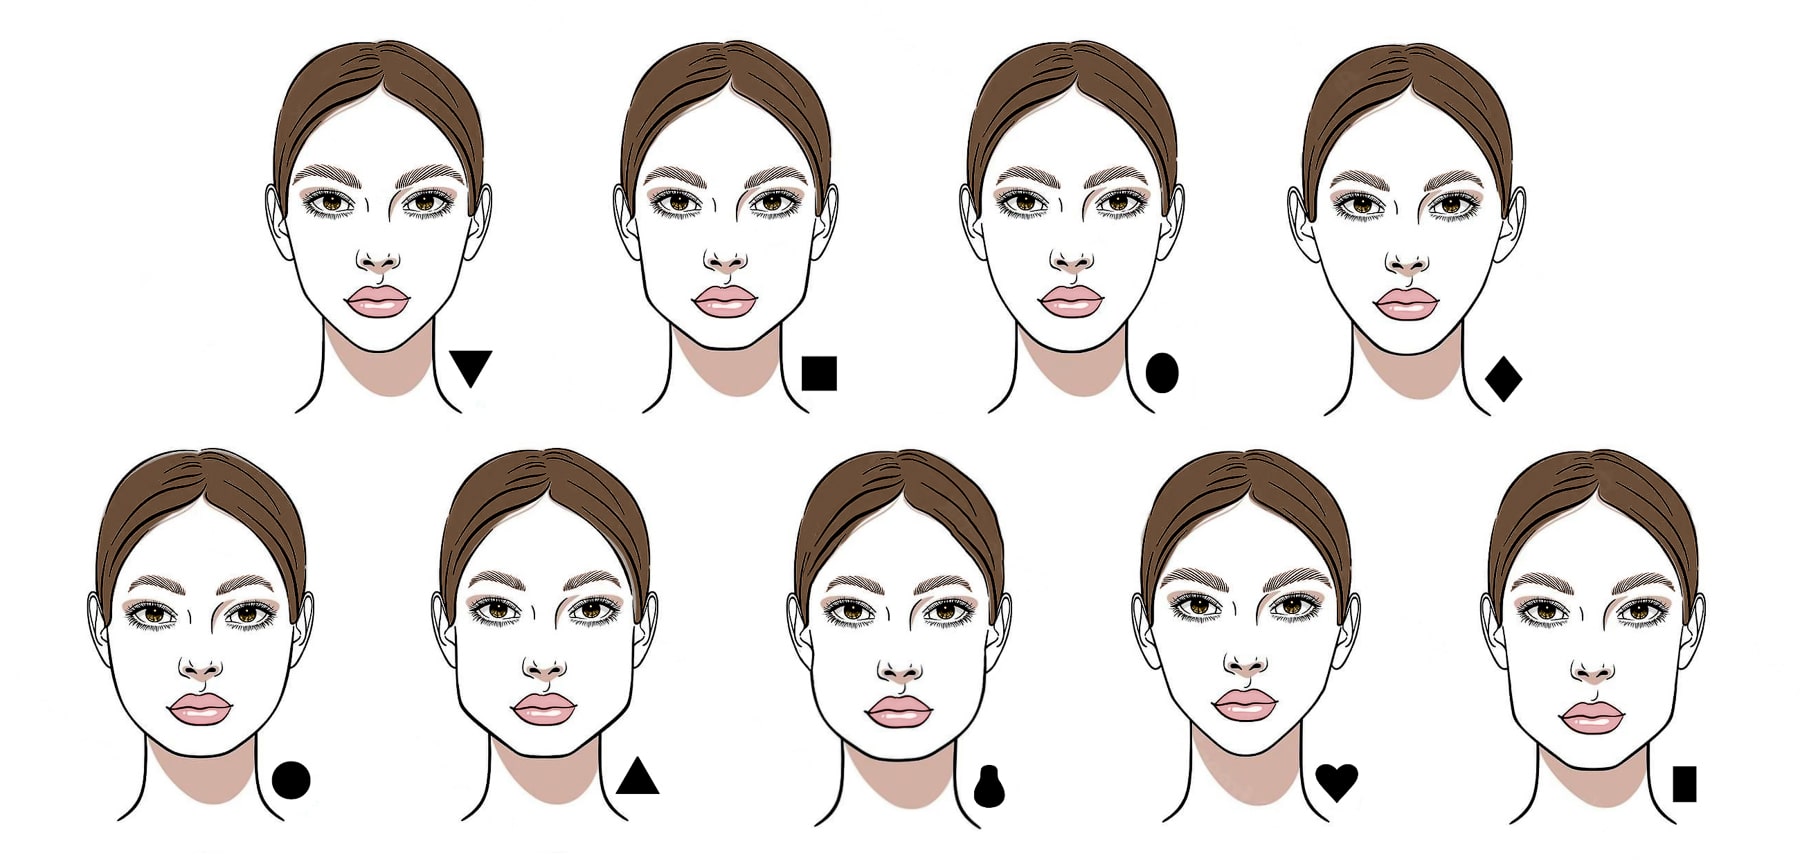 What Is My Face Shape? 3 Steps to Finding Your Face Shape